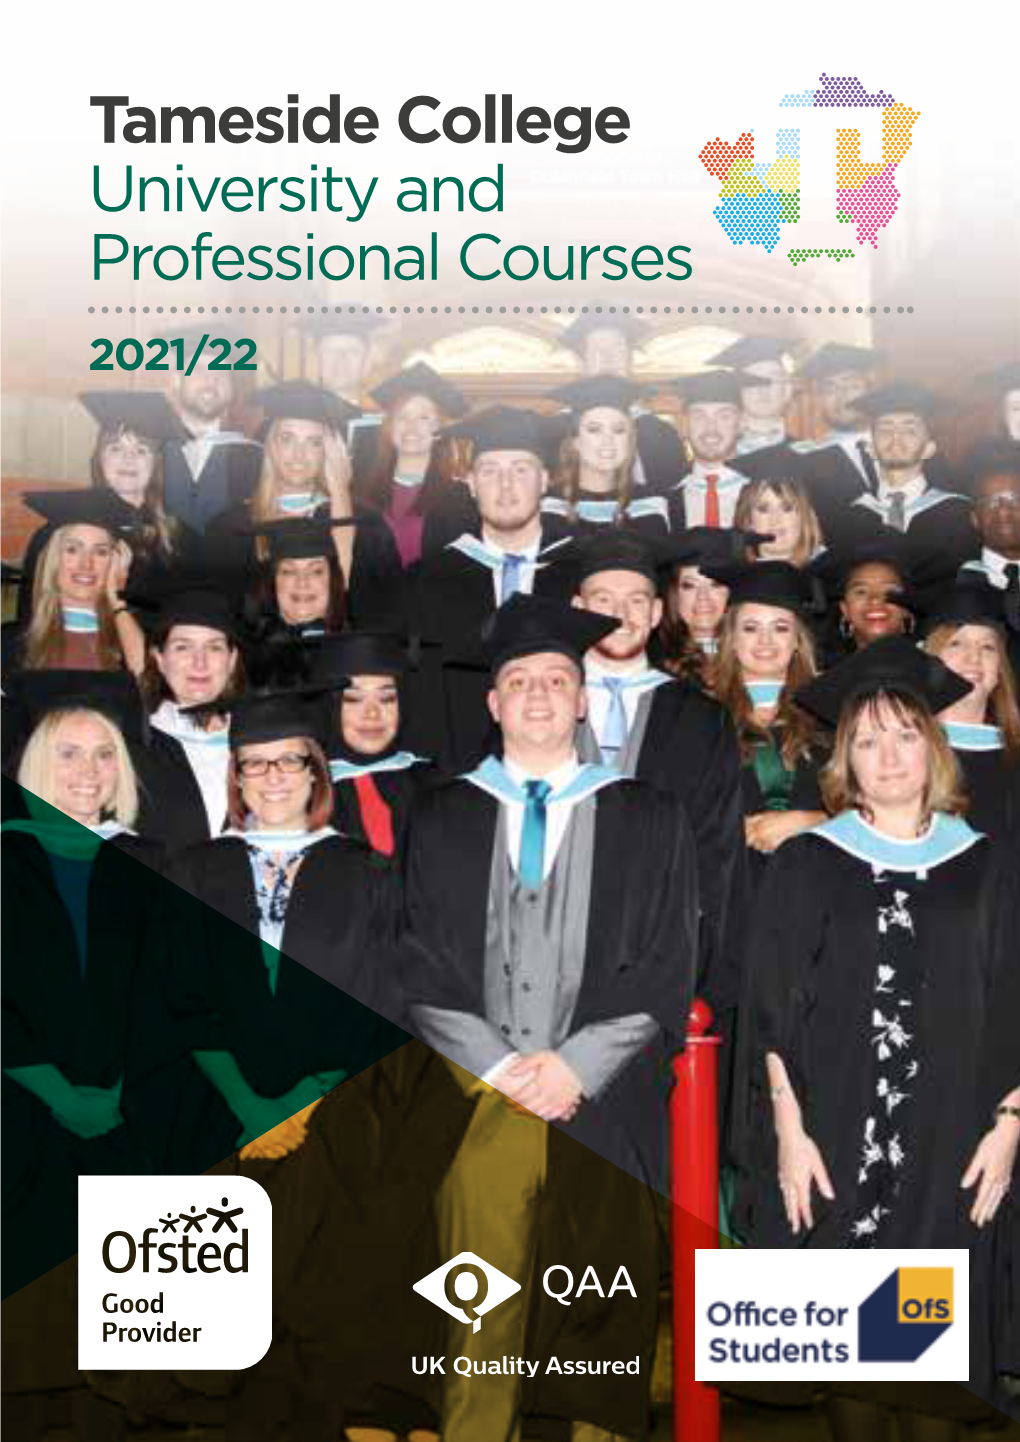 University and Professional Courses